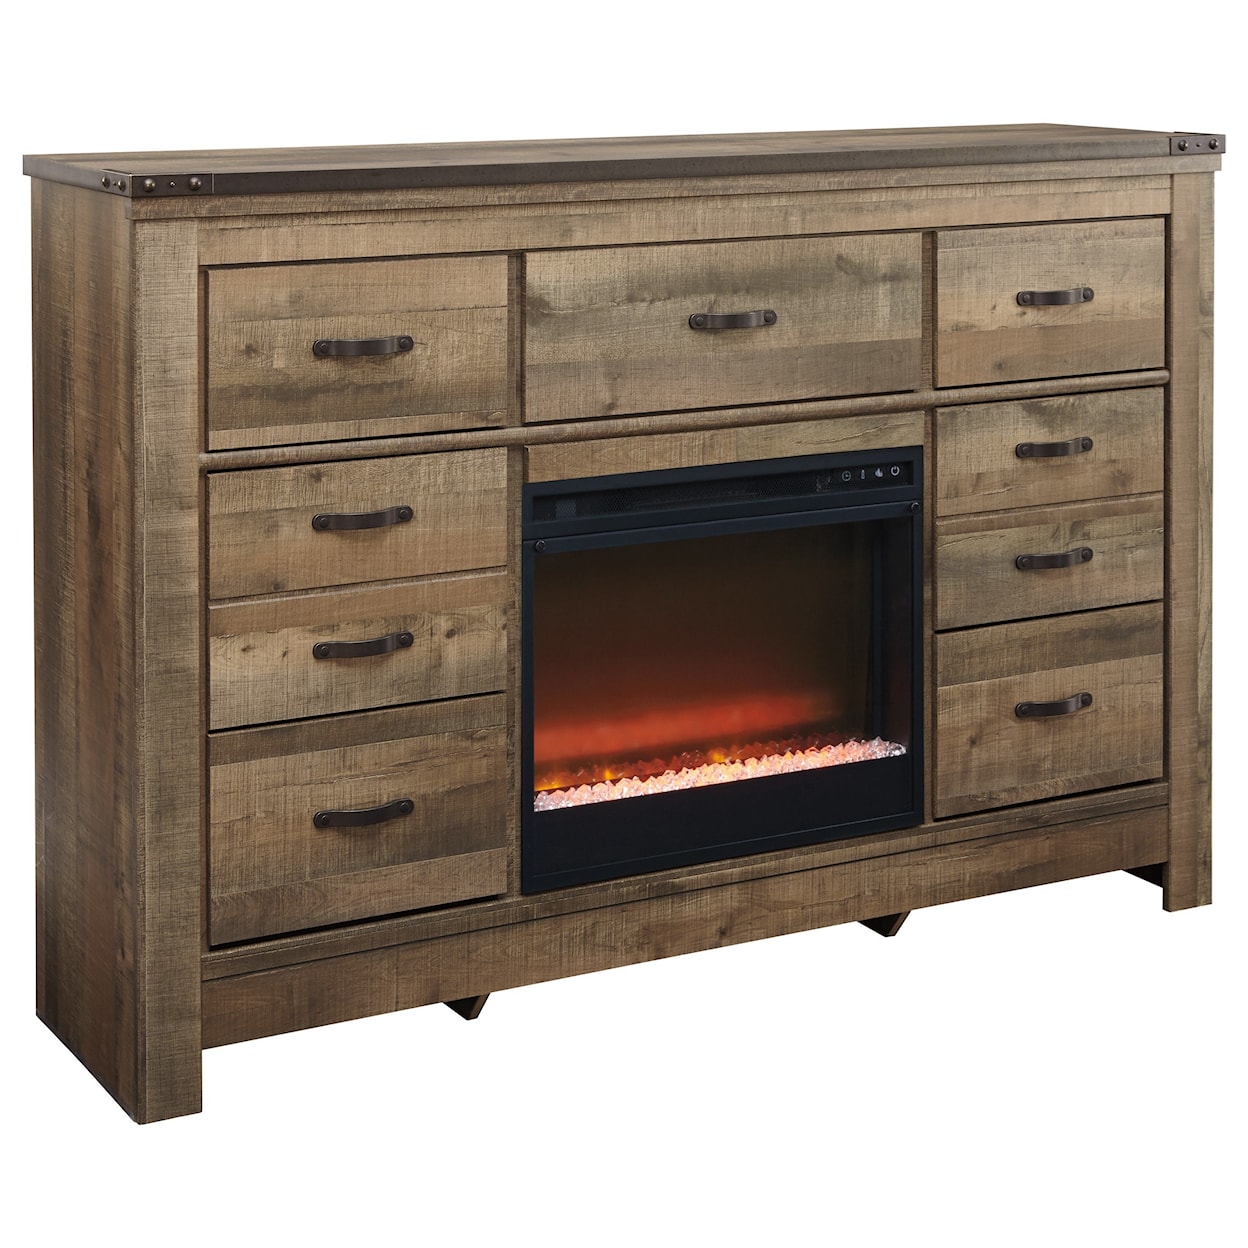 Signature Design by Ashley Trinell Dresser with Fireplace Insert